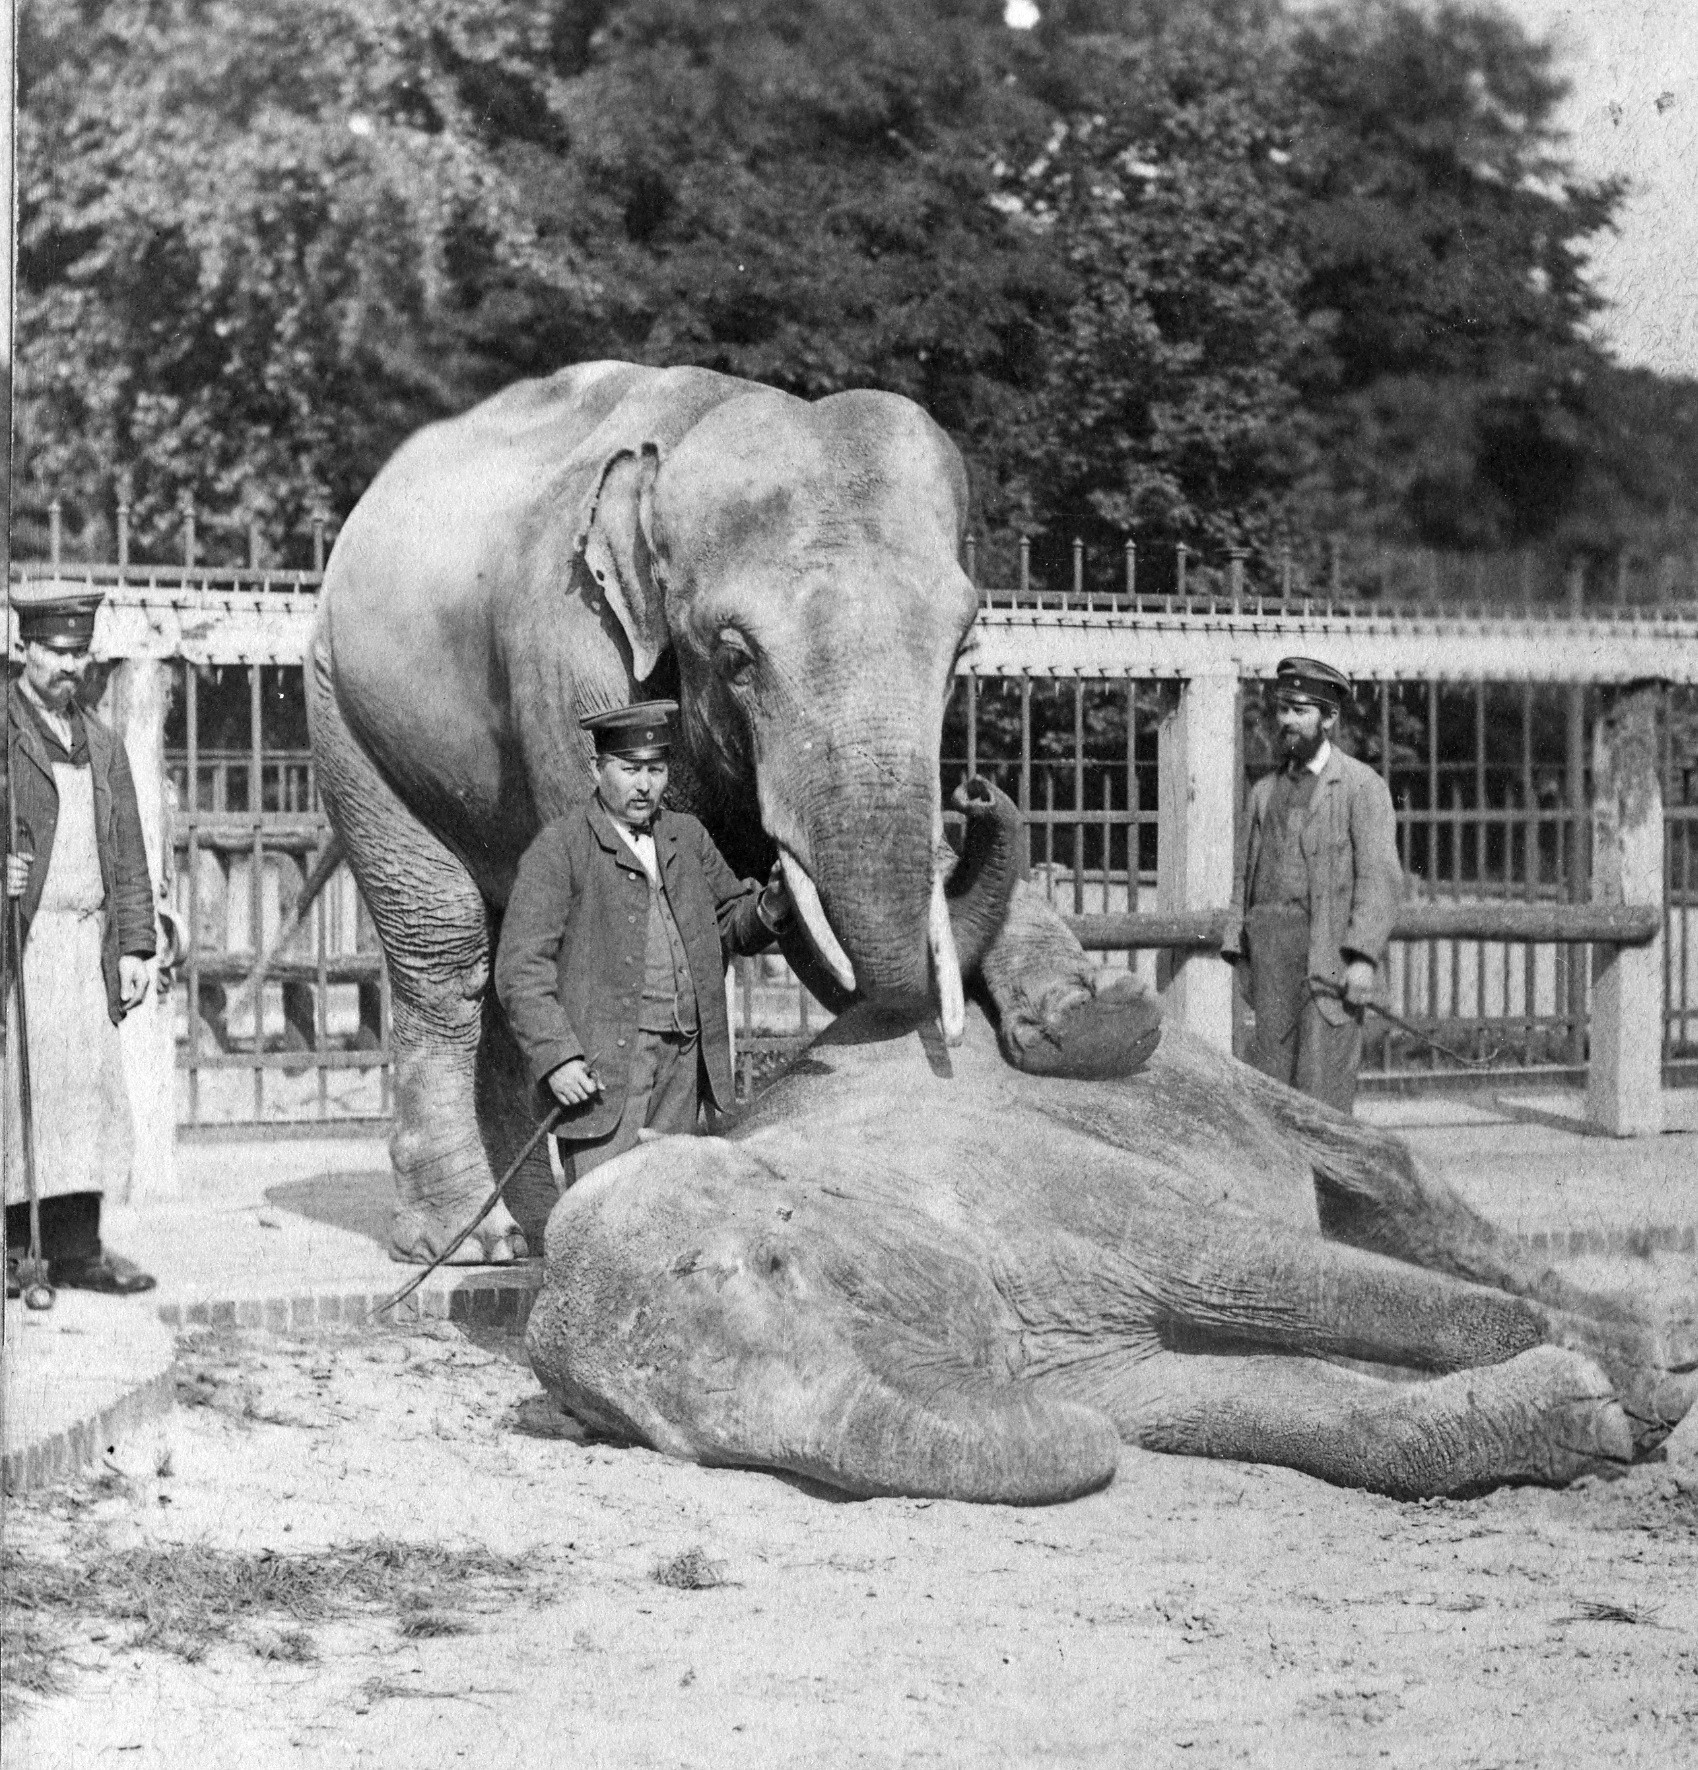 Black and white photograph: two elephants, one lying and one standing, with three zookeepers in front of a high fence.